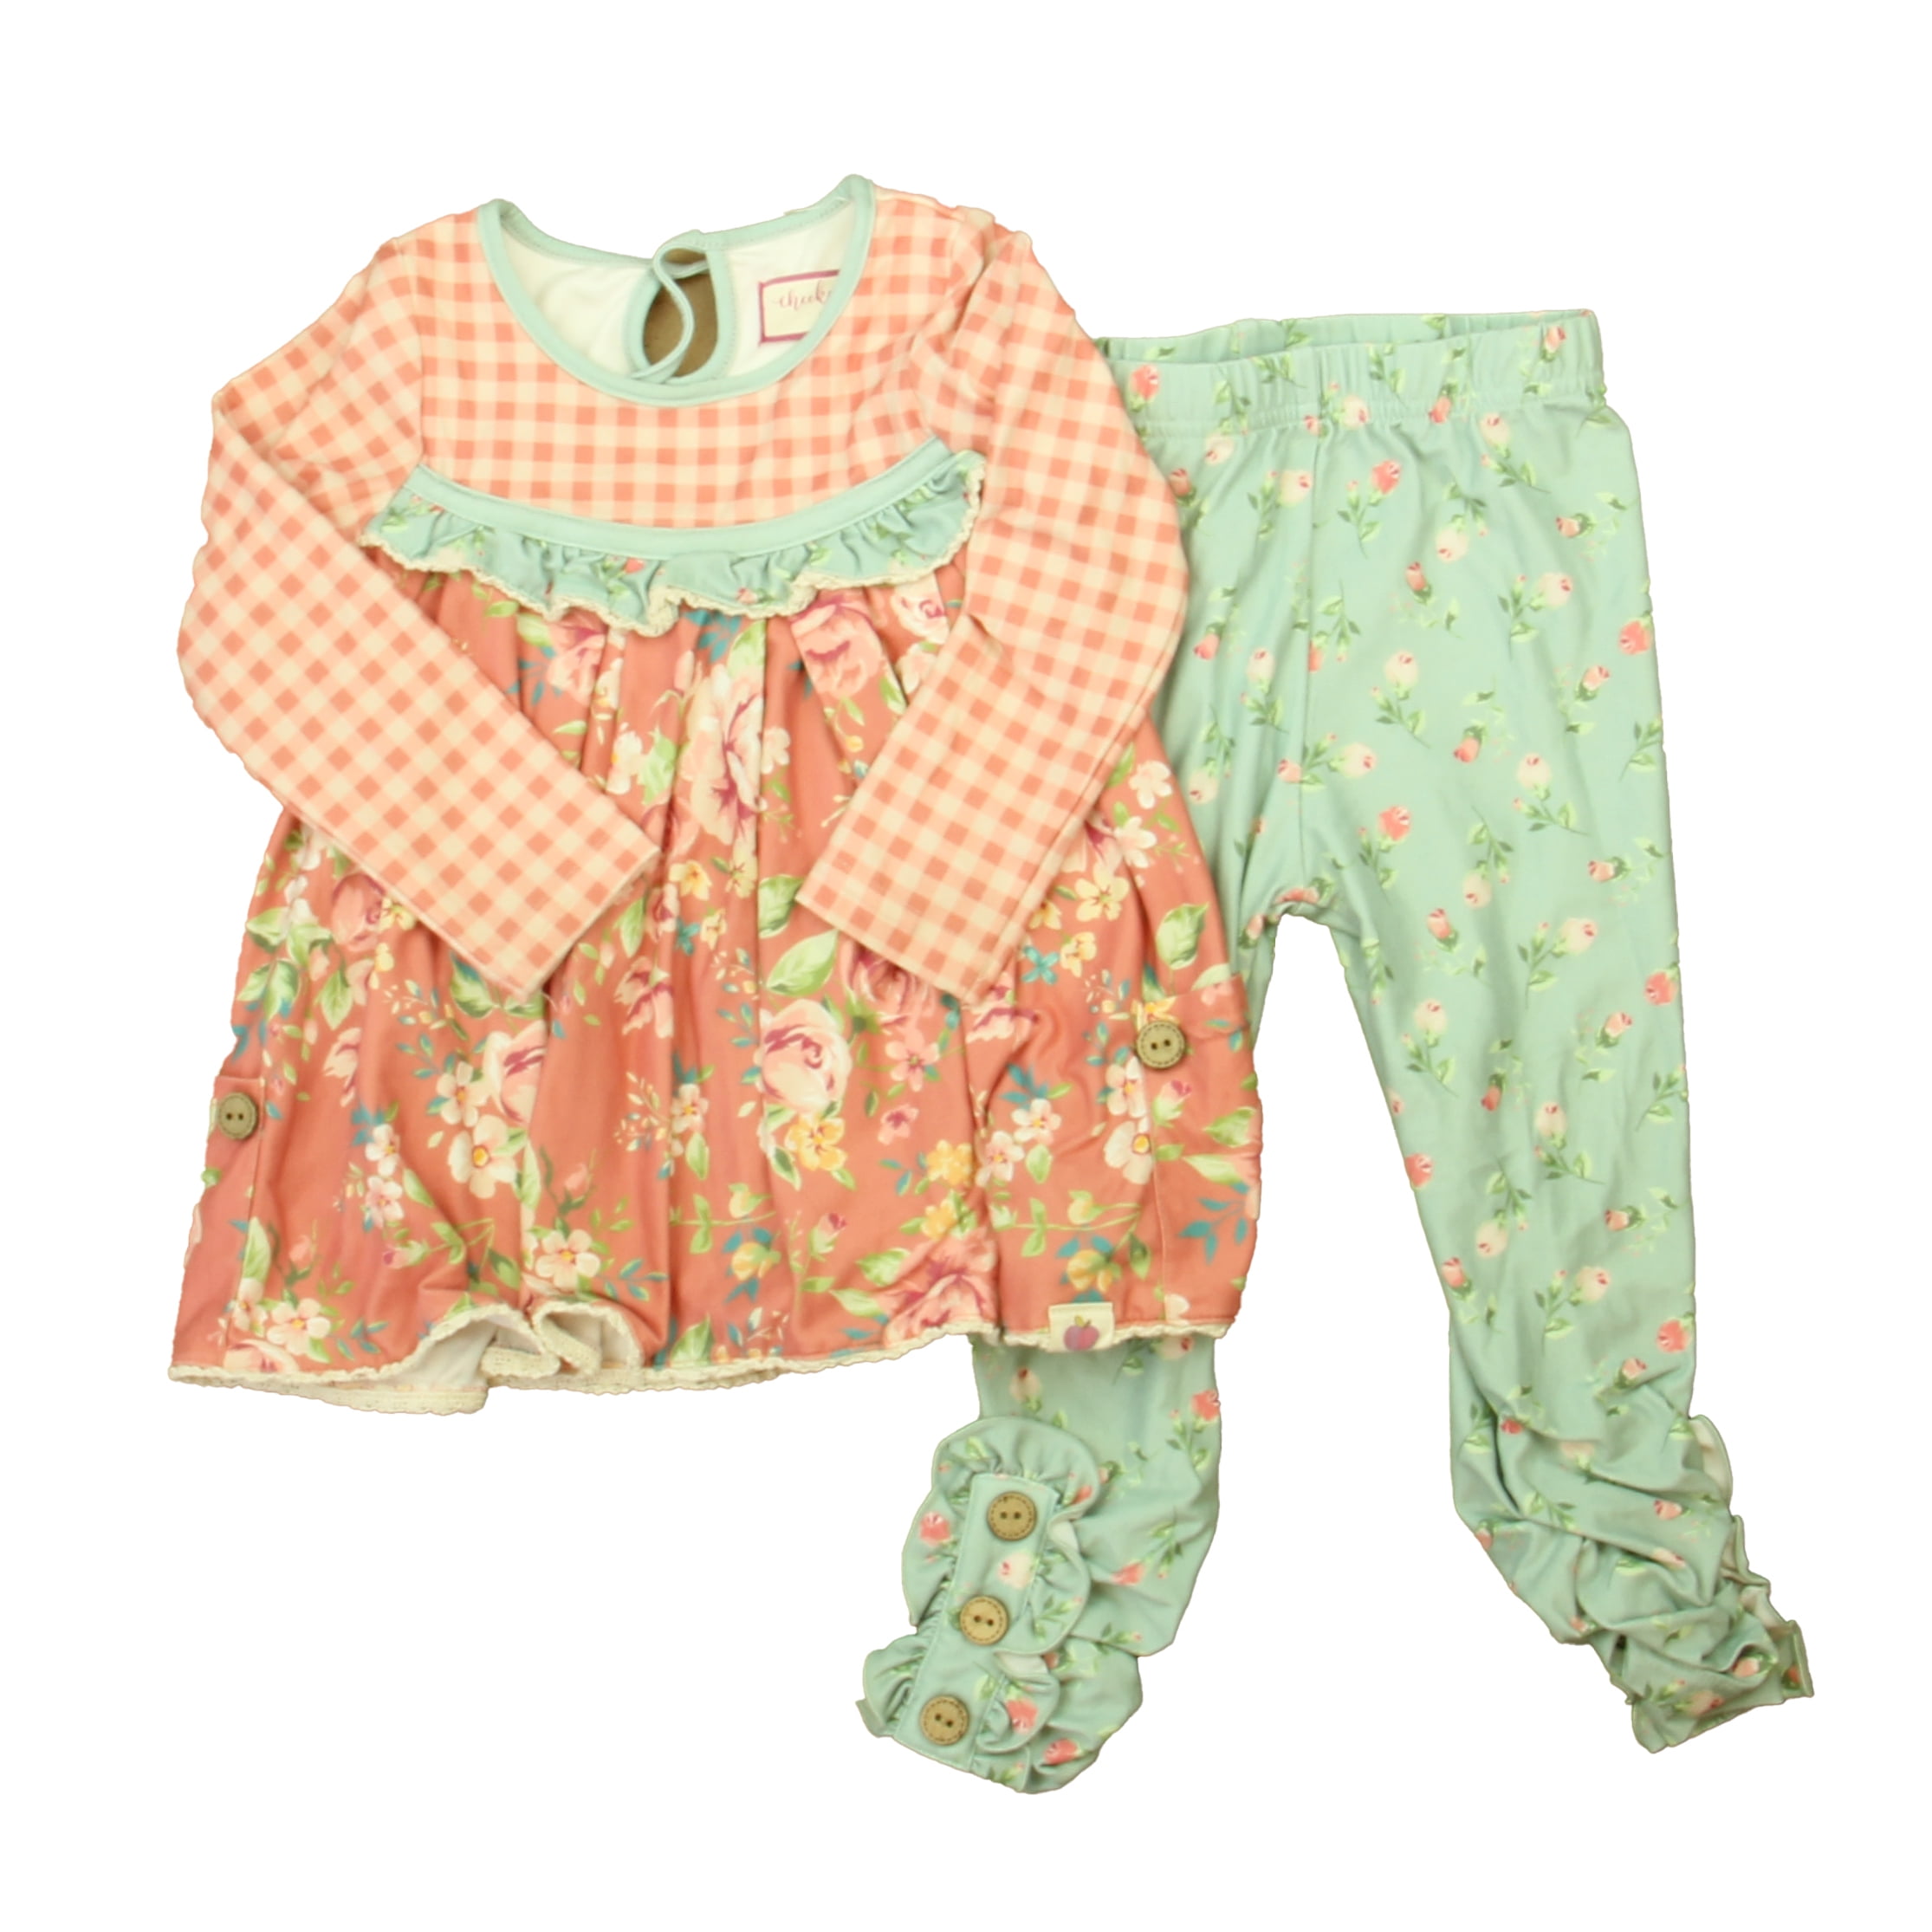 Pre-owned Cheeky Plum Girls Pink | Aqua Floral Apparel Sets size: 12-18  Months